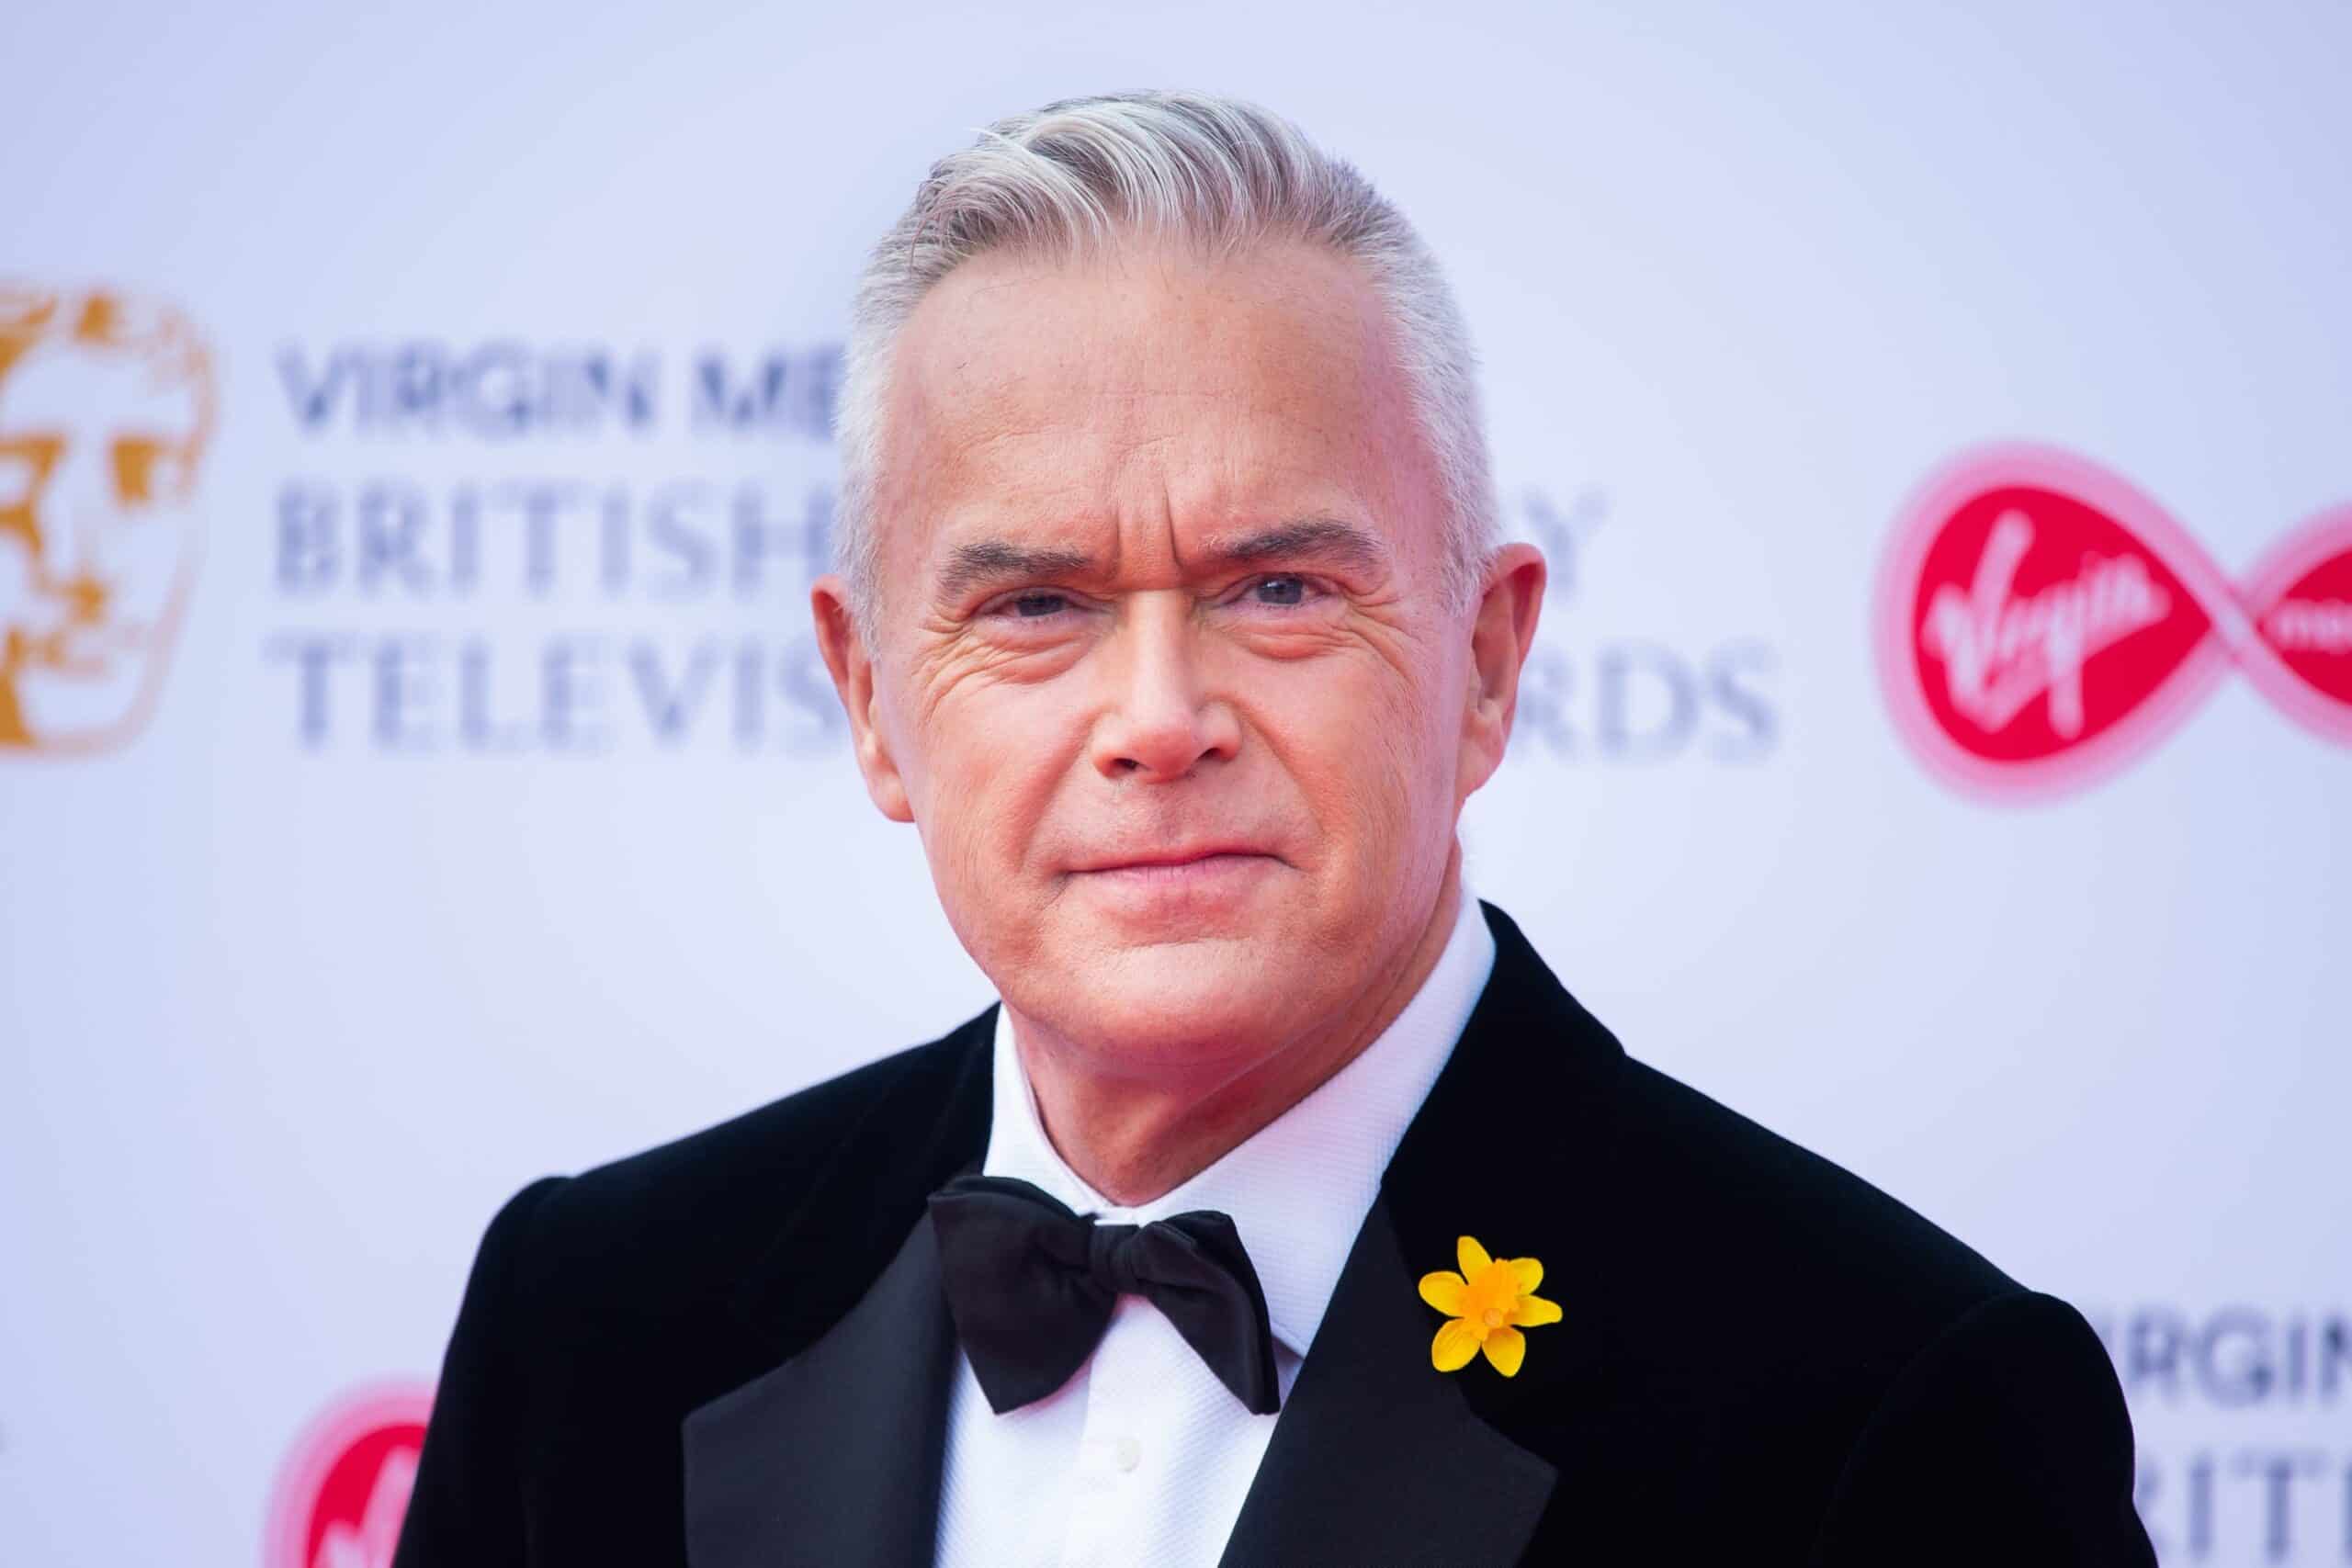 Murdoch’s TalkTV offered parents in Huw Edwards case ‘tens of thousands’ for an interview